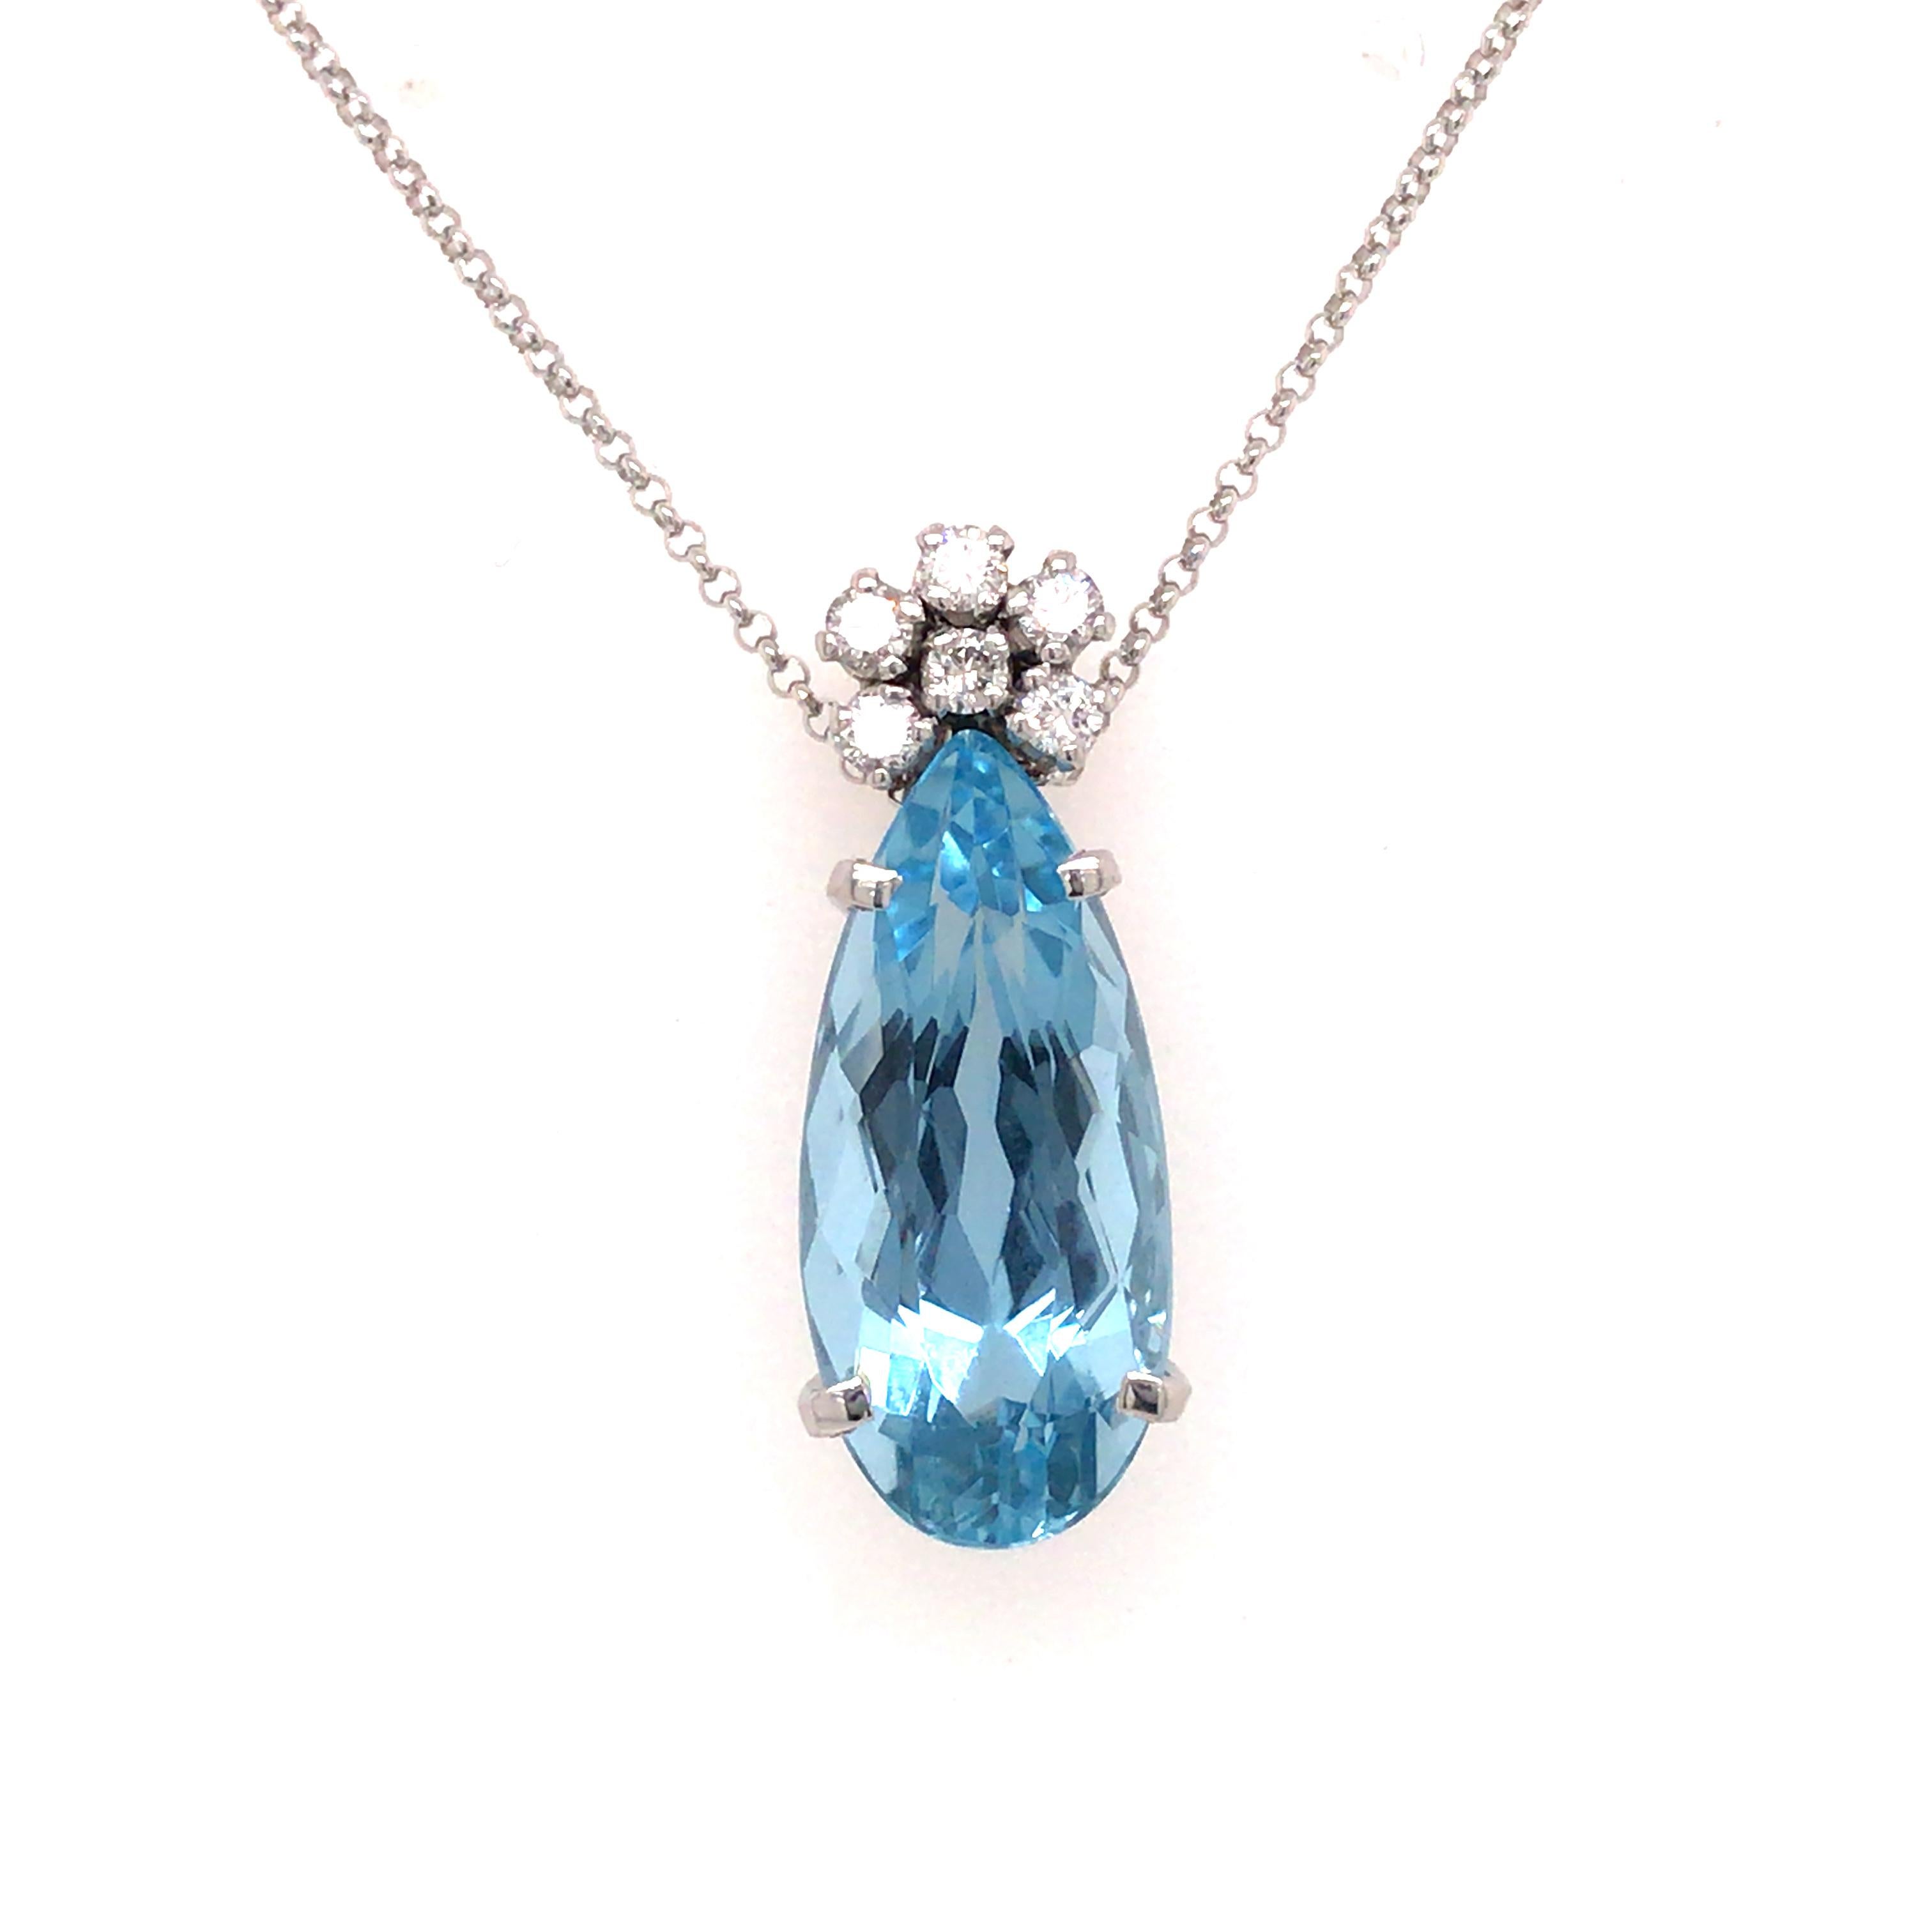 H Stern 6.56 Carat Santa Maria Aqua Pendant with Diamond Cluster in 18K White Gold.  (6) Round Brilliant Cut Diamonds weighing 0 .18 carat total weight G-H in color and VS in clarity are expertly set.  The Pendant measures 1 inch in length and 3/8